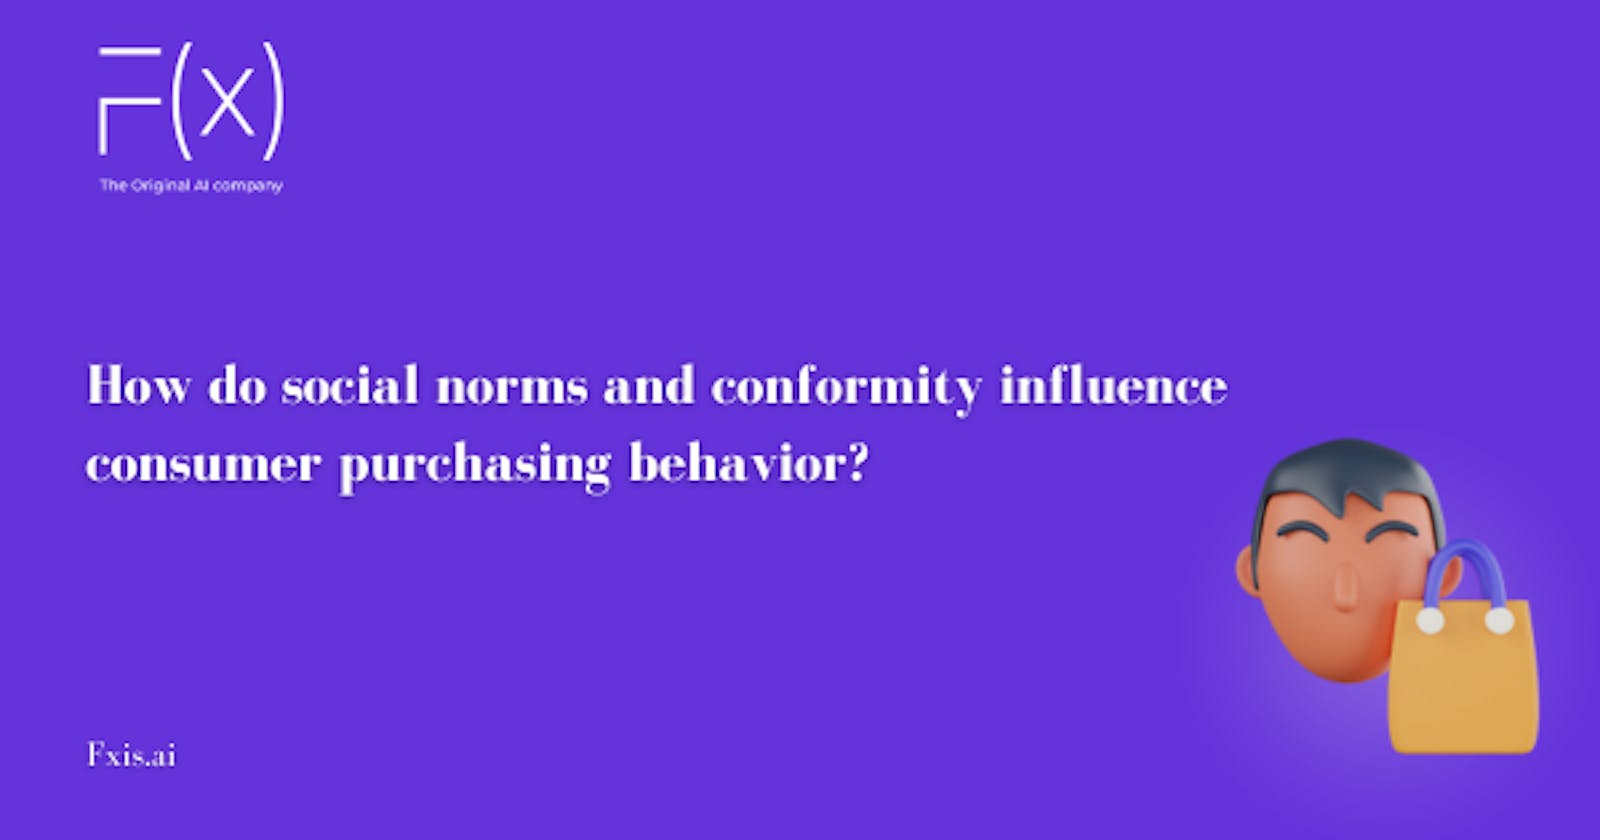 How do social norms and conformity influence consumer purchasing behavior?